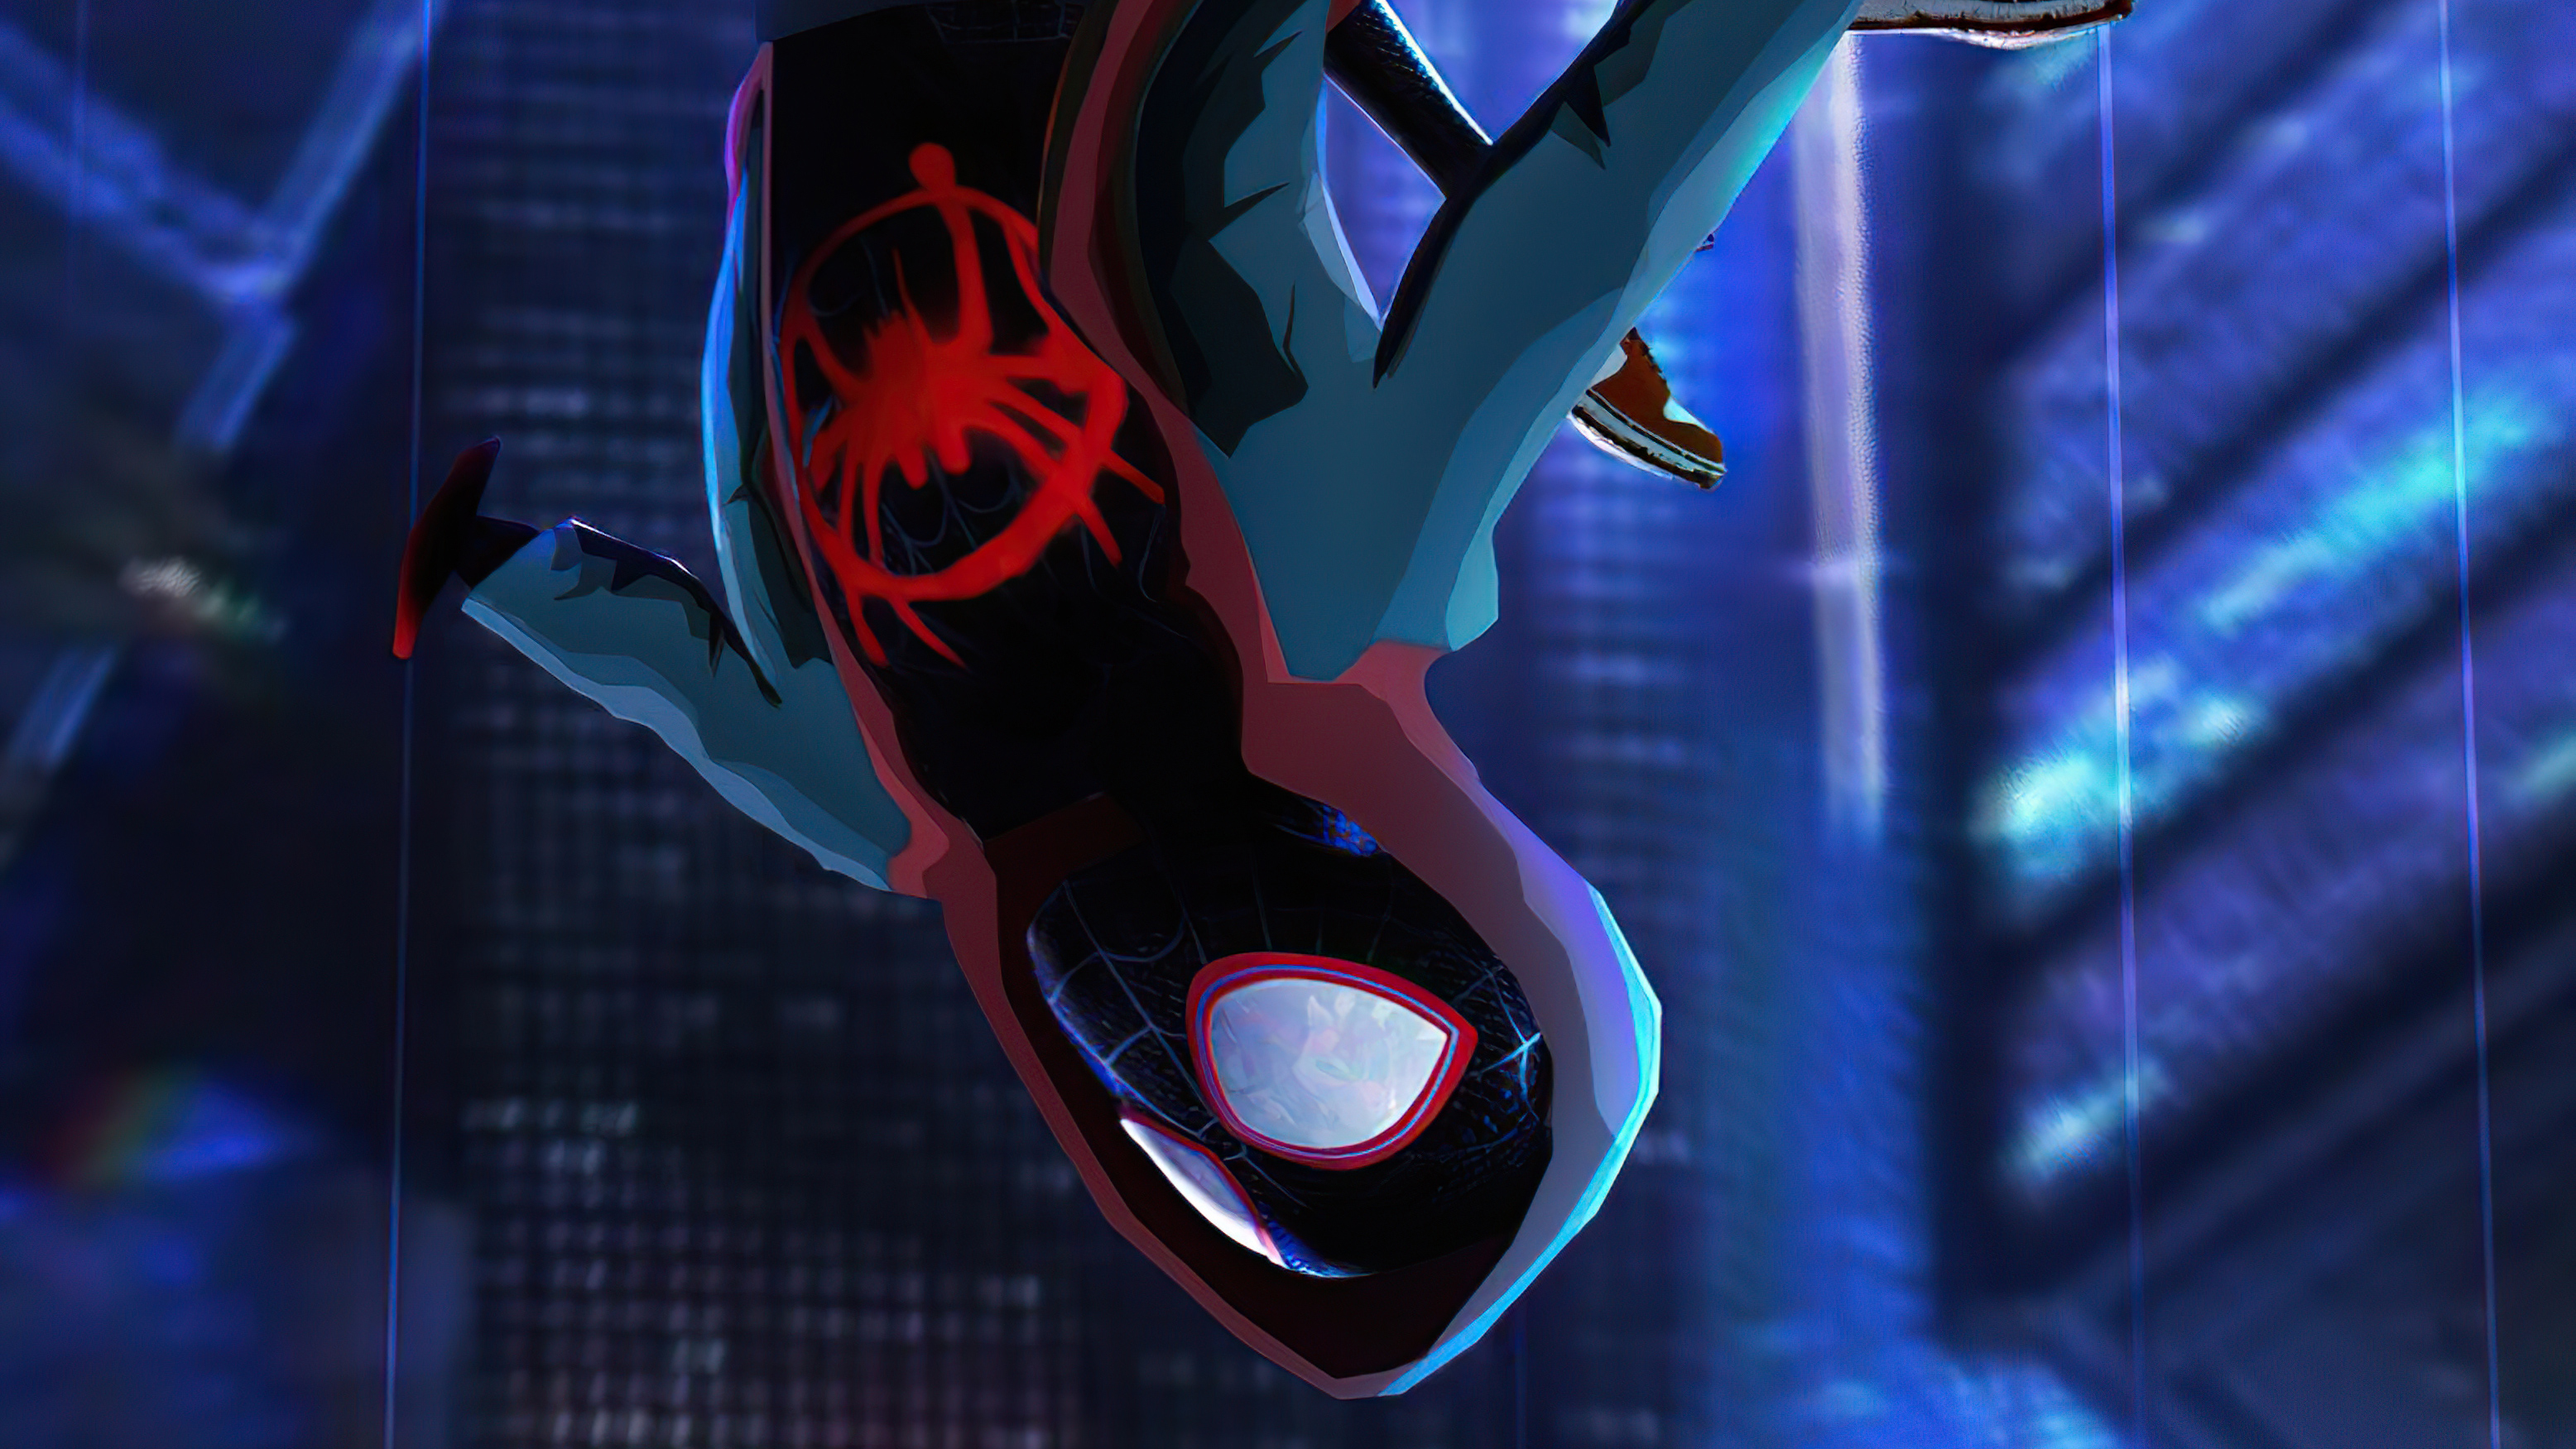 Spider-Man: Into The Spider-Verse HD Wallpaper by Camille Vialet